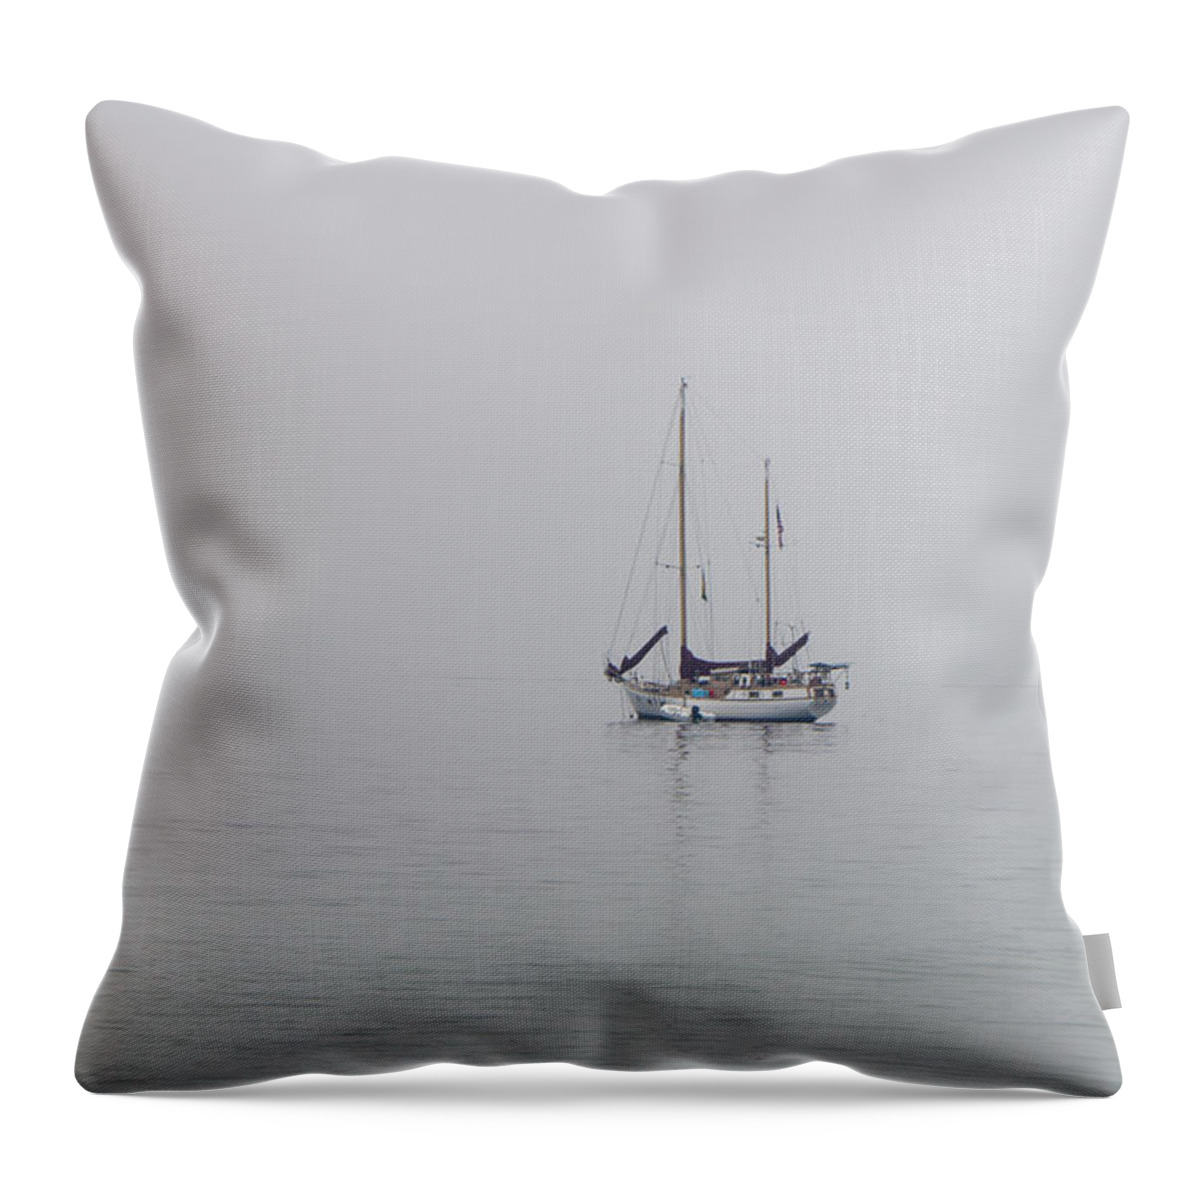 Boat Throw Pillow featuring the photograph Anchored in the Mist by Derek Dean